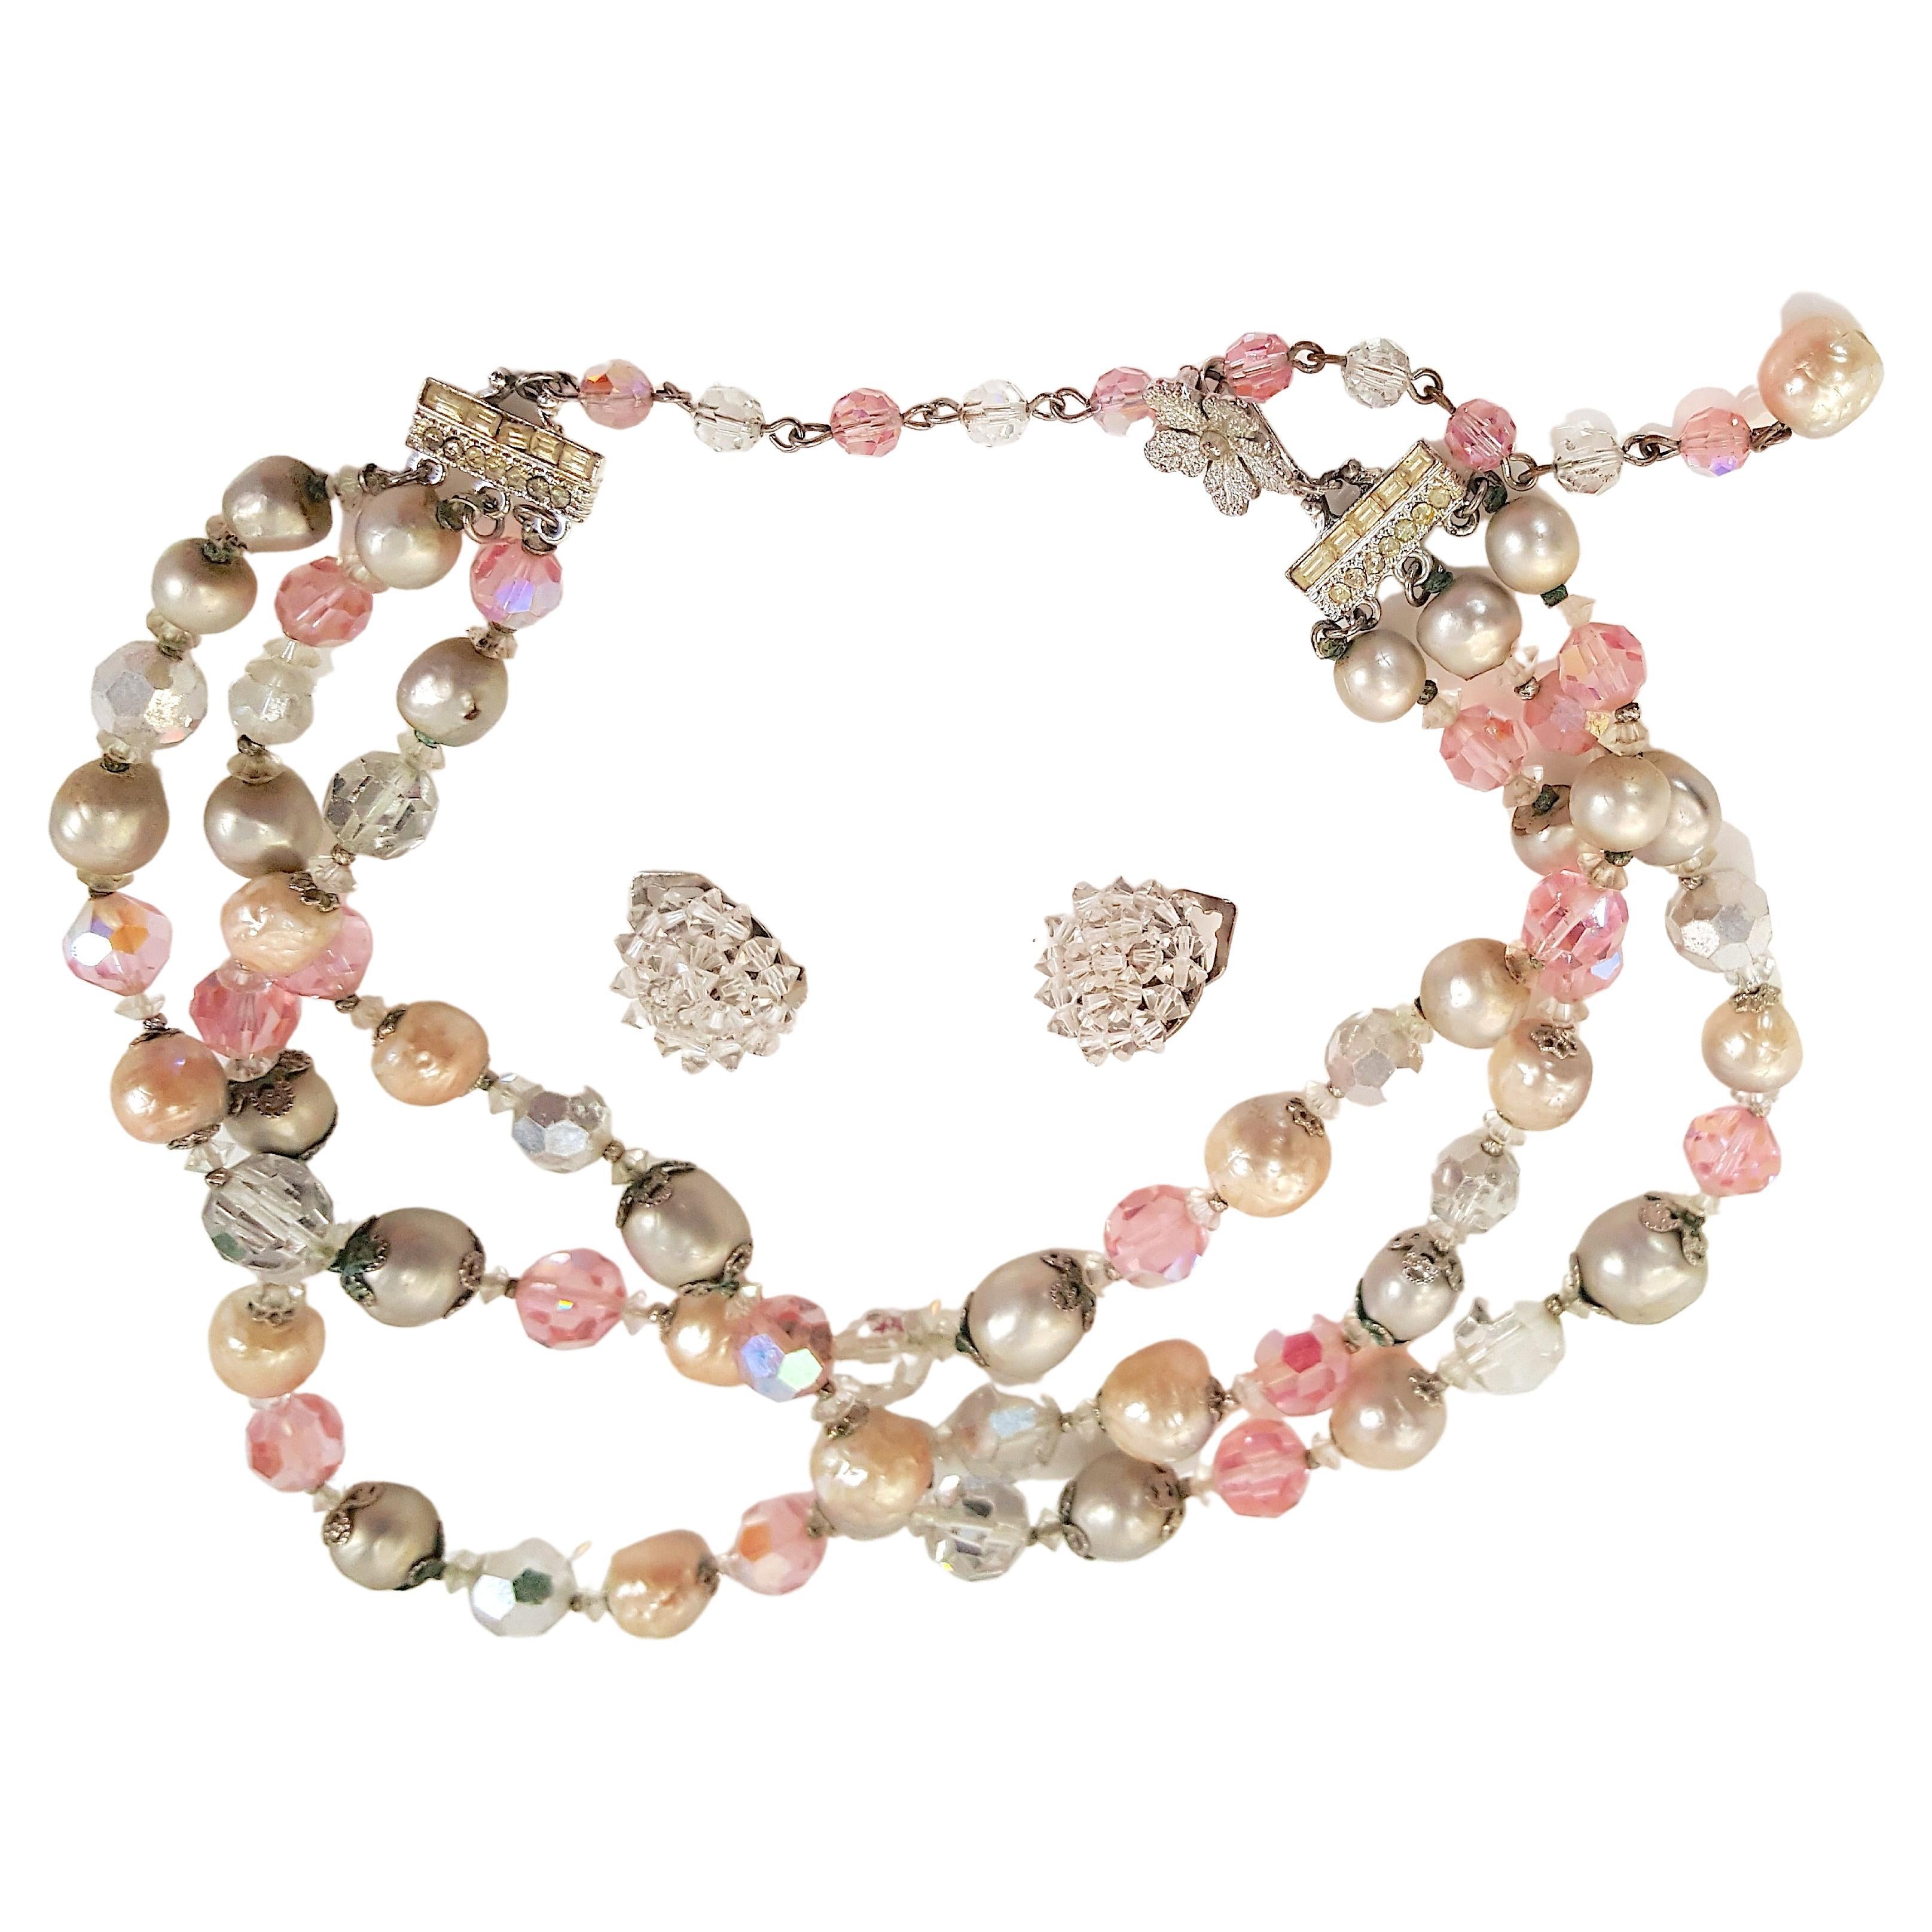 Vendome 1948-55 Crystal Beaded Set Earrings & 3Strand Capped Faux Pearl Necklace For Sale